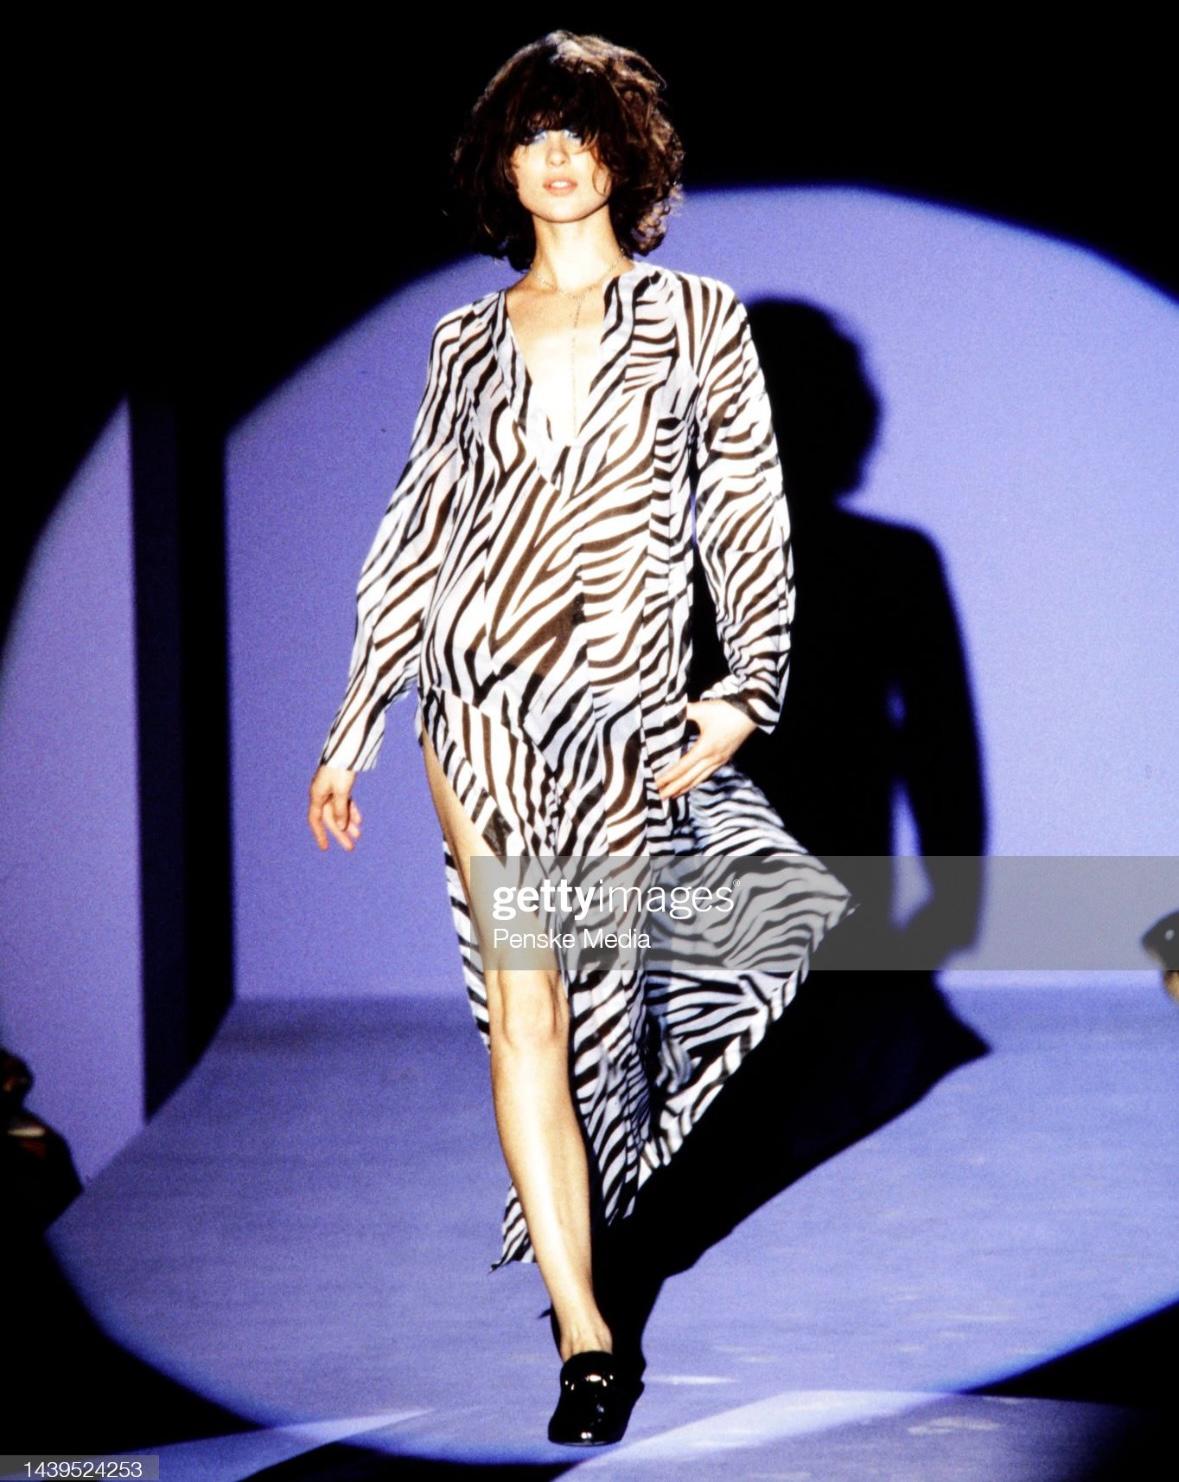 Presenting a fabulous zebra print Gucci tunic dress, designed by Tom Ford. From the Spring/Summer 1996 collection, this dress debuted on the season’s runway on Shalom Harlow and was also featured in the season’s ad campaign. Anneliese Seubert also